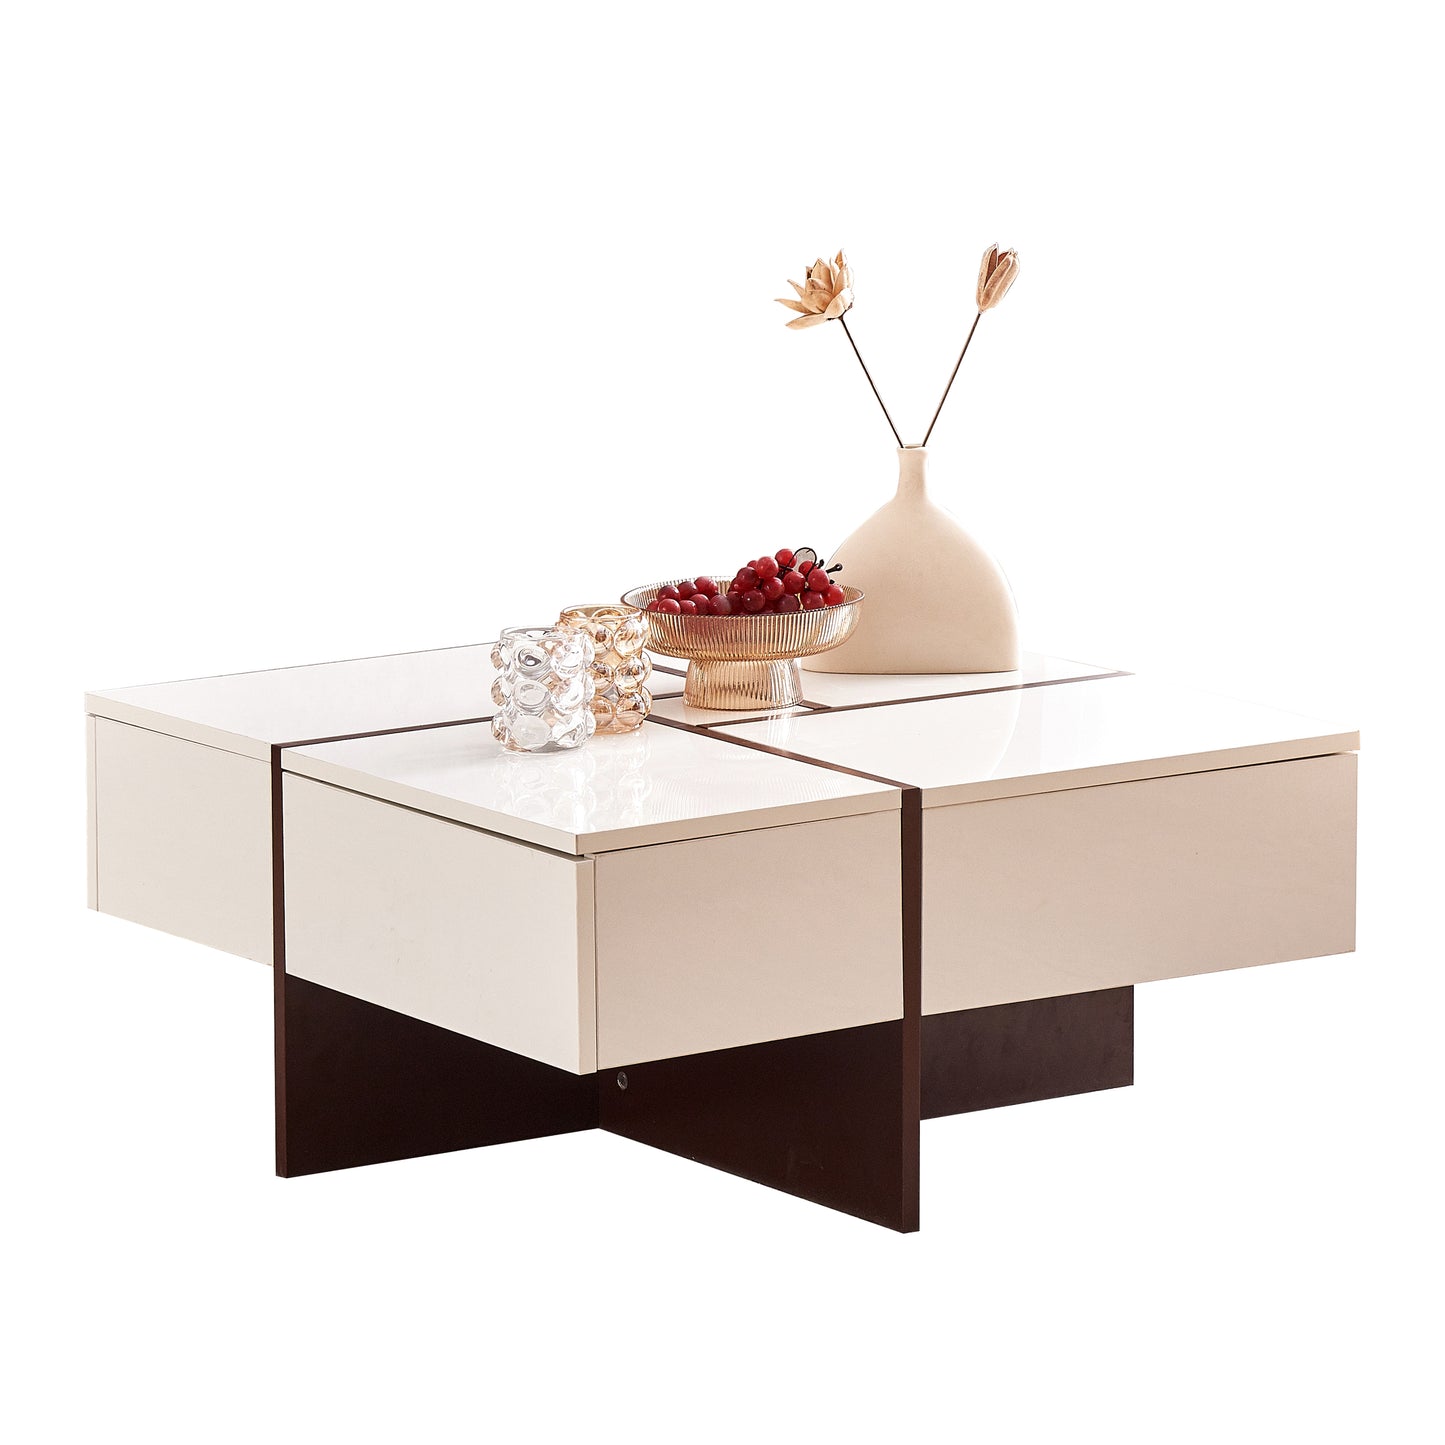 Elegant White & Walnut Square Coffee Table with 4 Drawers